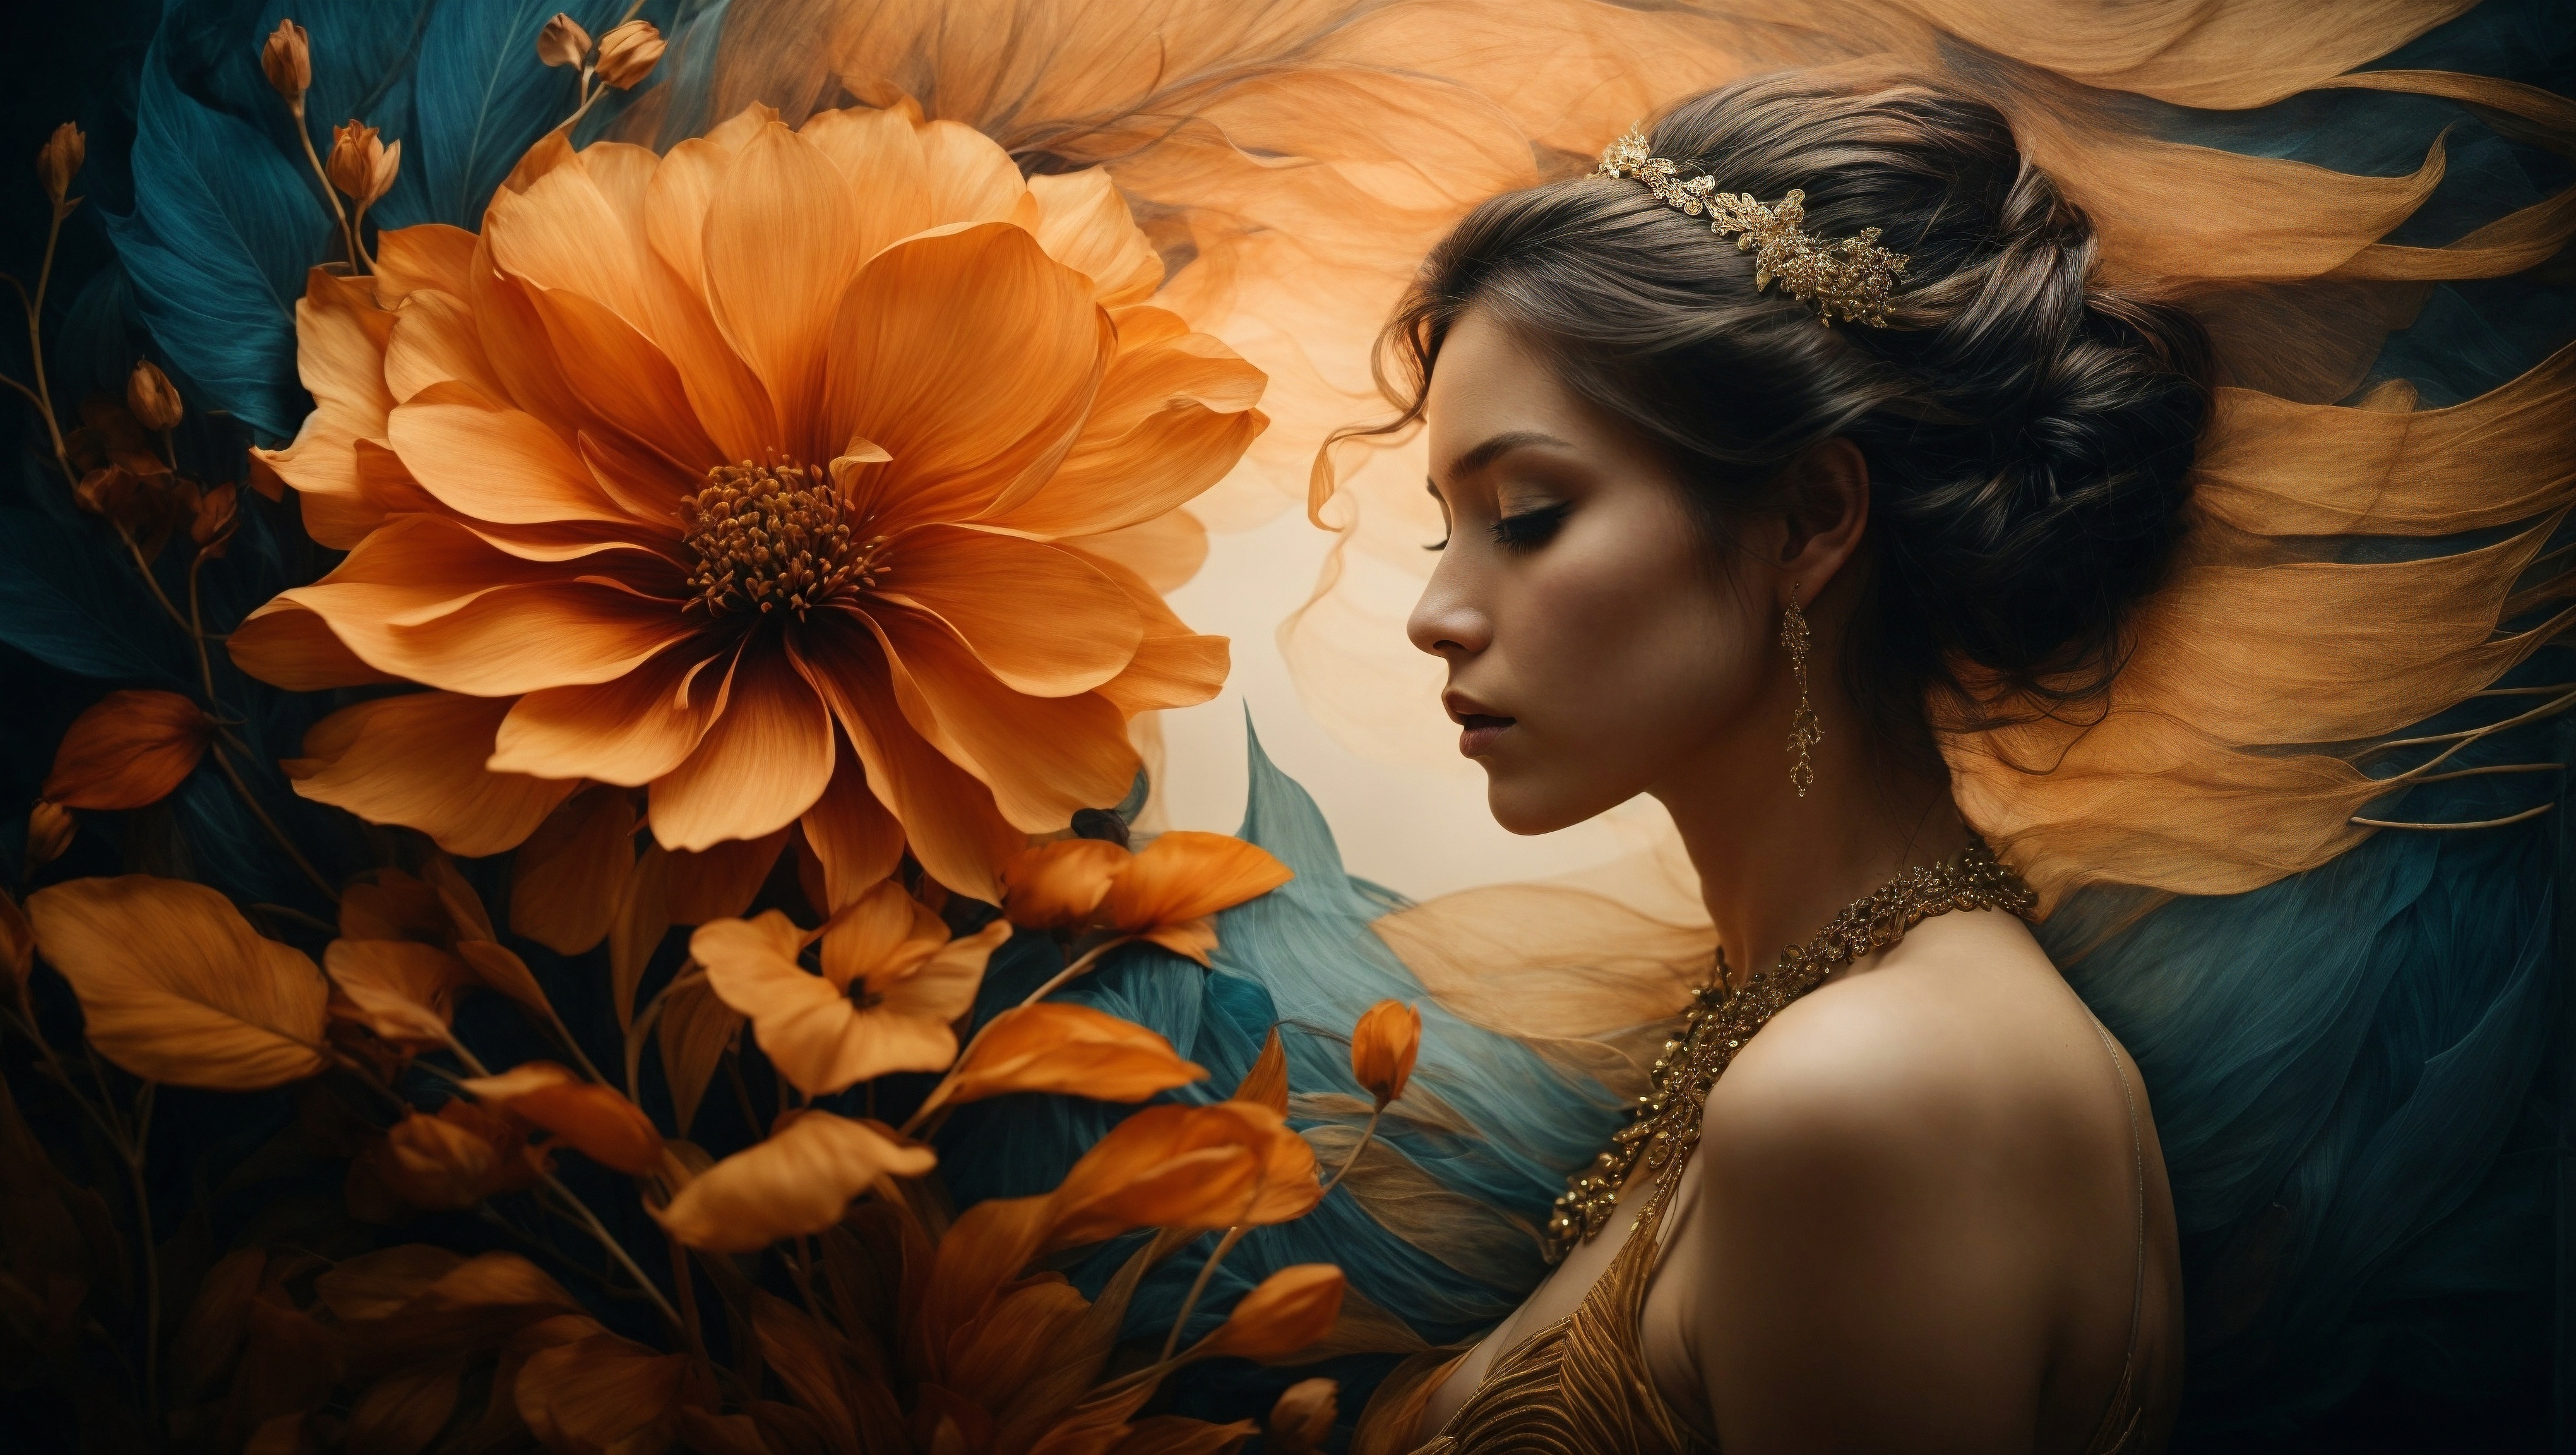 The woman with an orange flower is surrounded by bright orange flowers